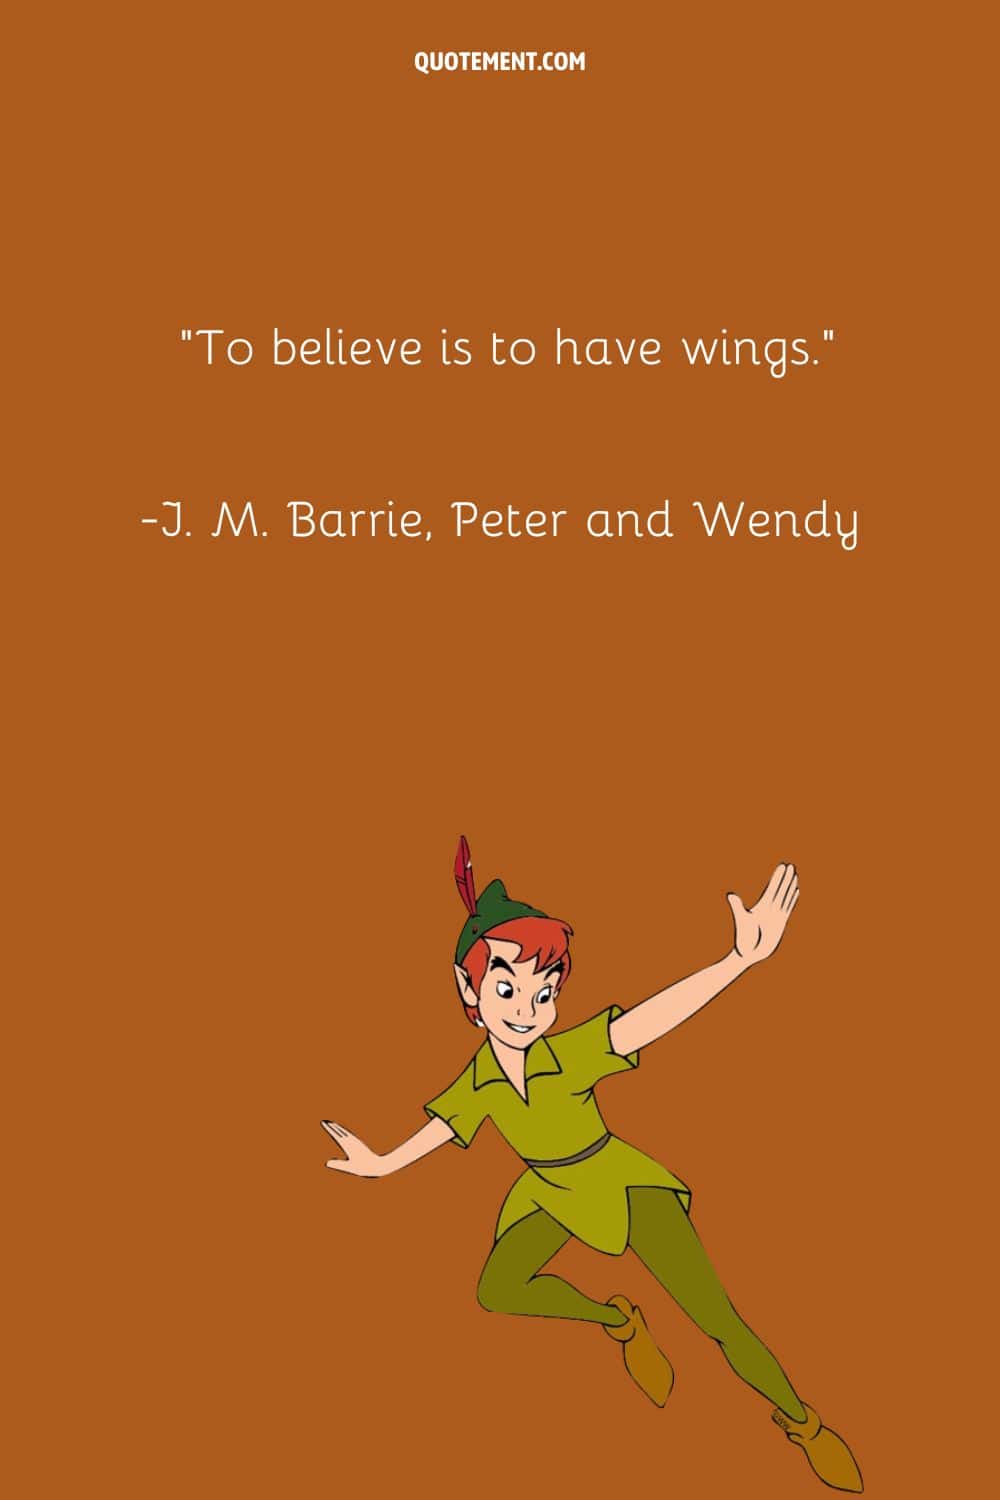 “To believe is to have wings.” ― J. M. Barrie, Peter and Wendy